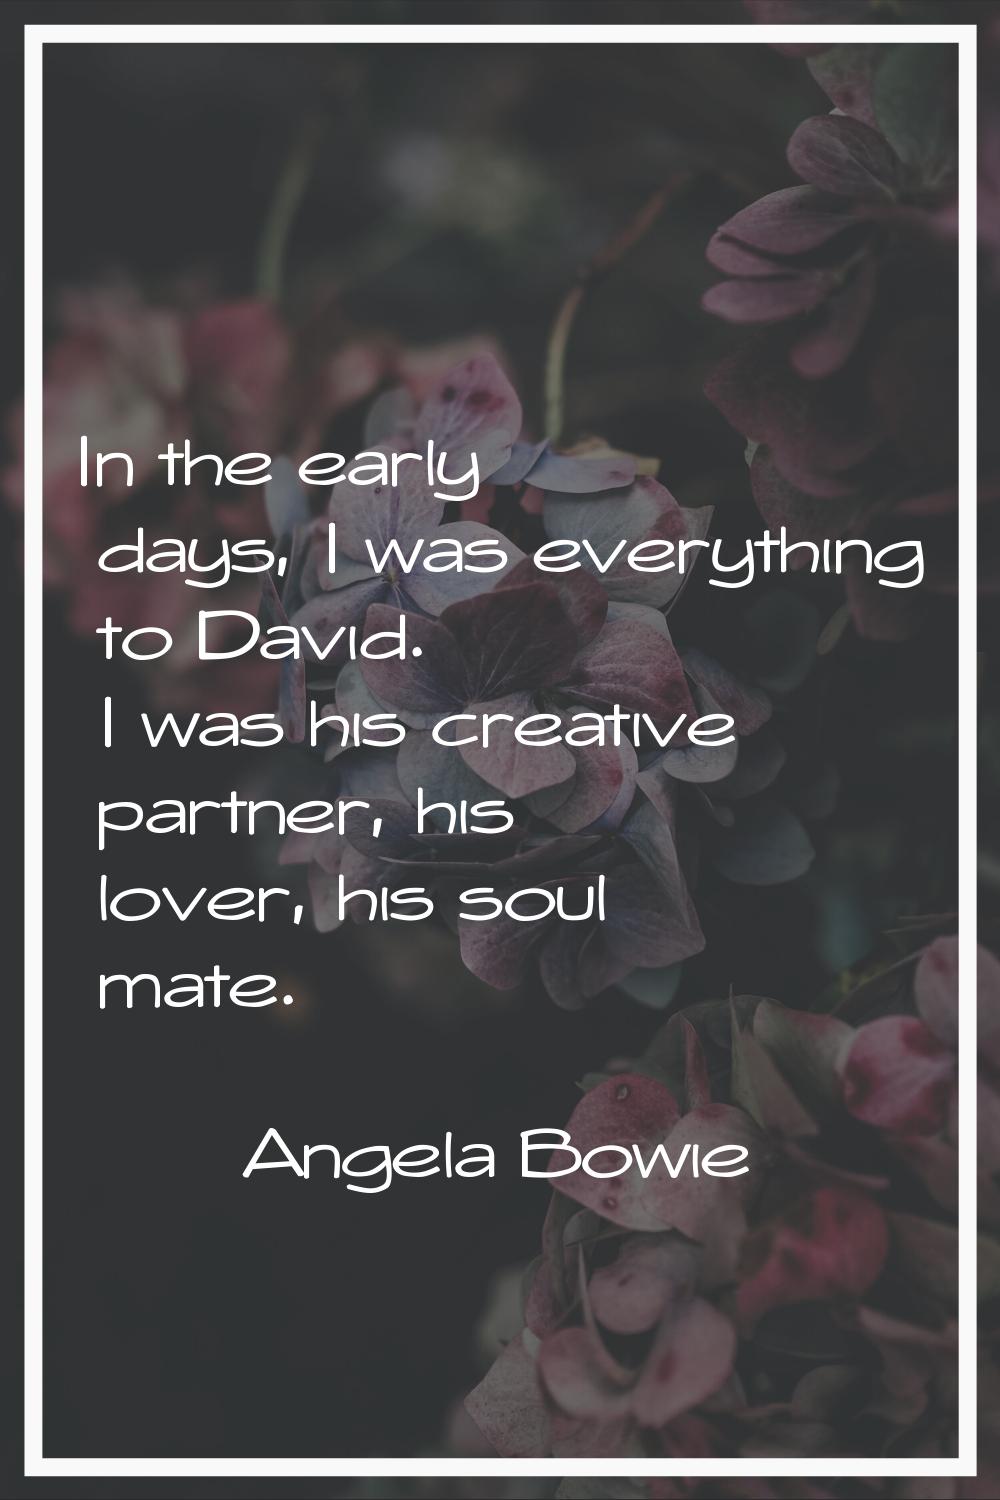 In the early days, I was everything to David. I was his creative partner, his lover, his soul mate.